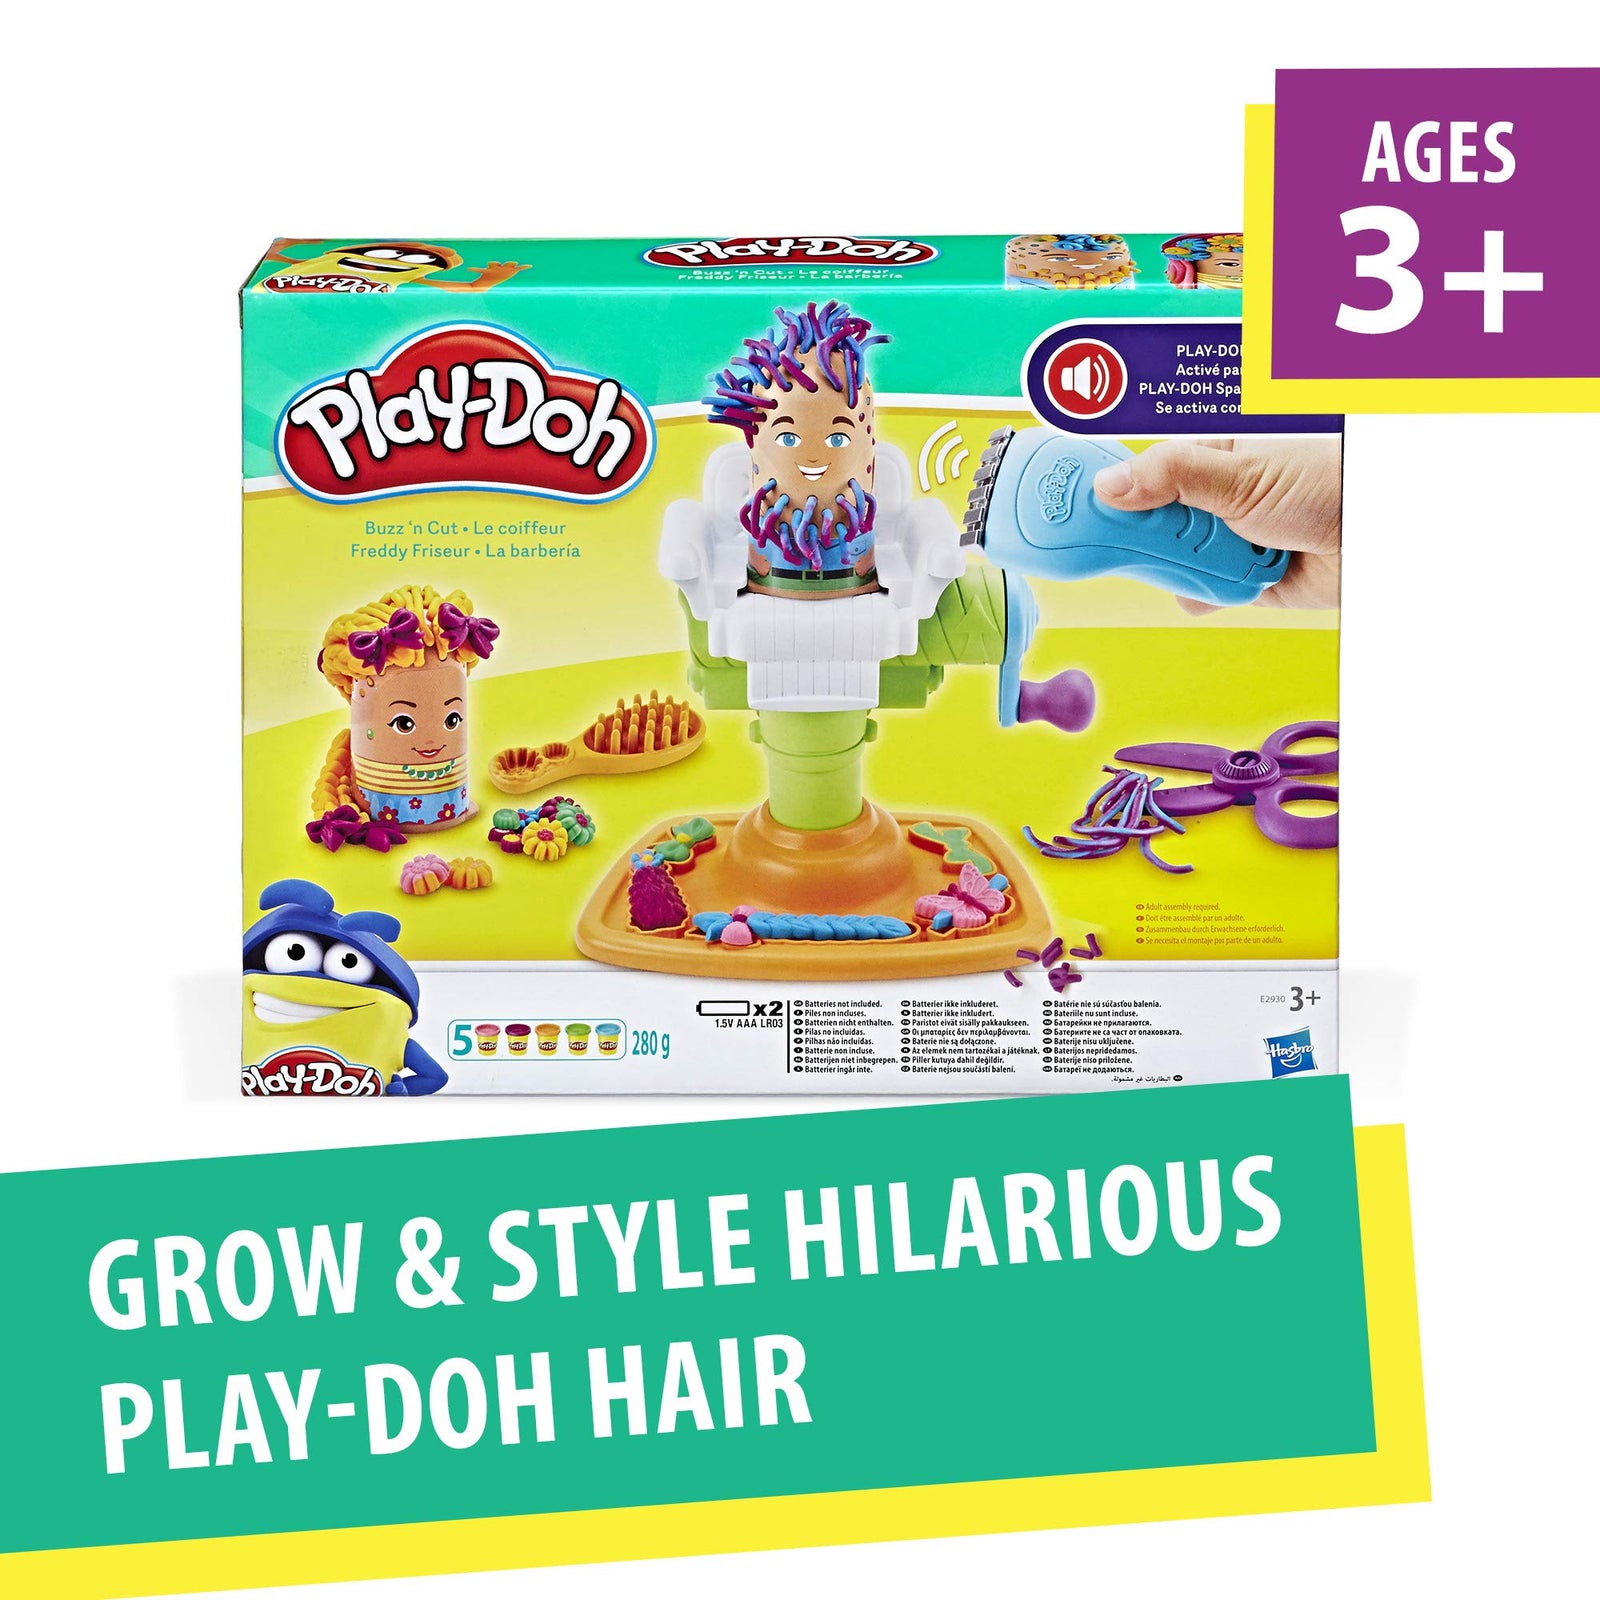 Play-Doh E2930 Buzz 'n Cut Fuzzy Pumper Barber Shop Toy with Electric Buzzer and 5 Non-Toxic Colors, 2-Ounce Cans